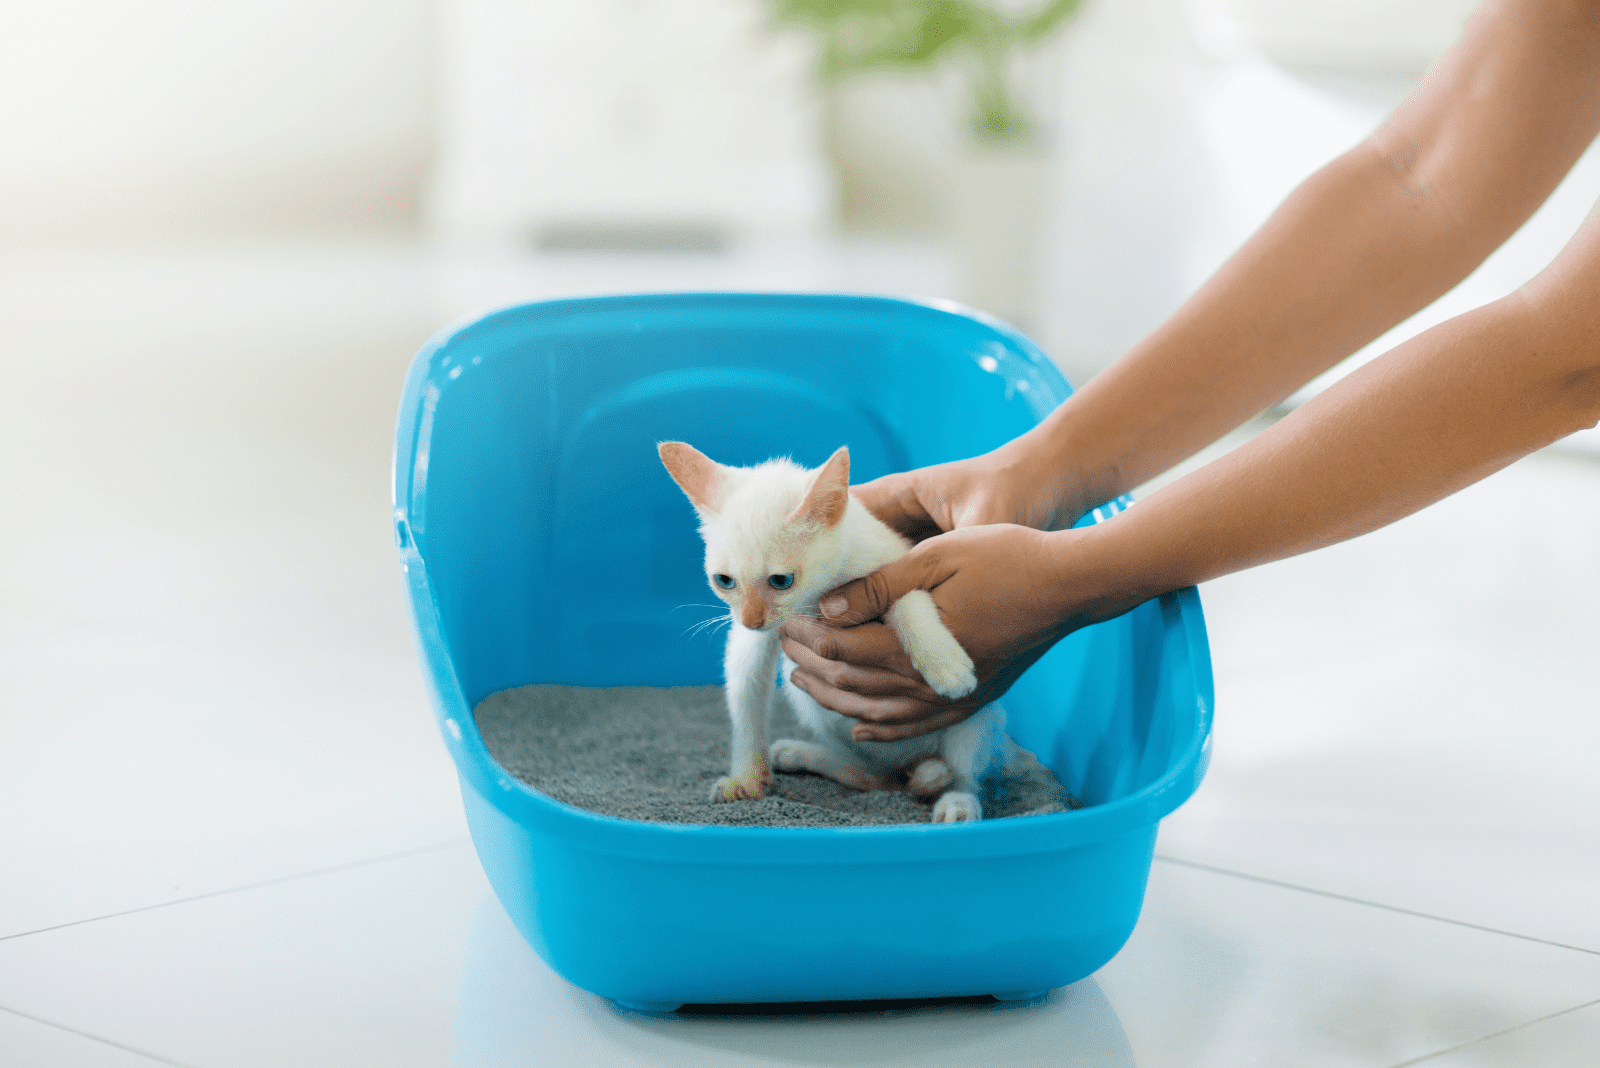 the woman puts the kitten in the sand with the bowl